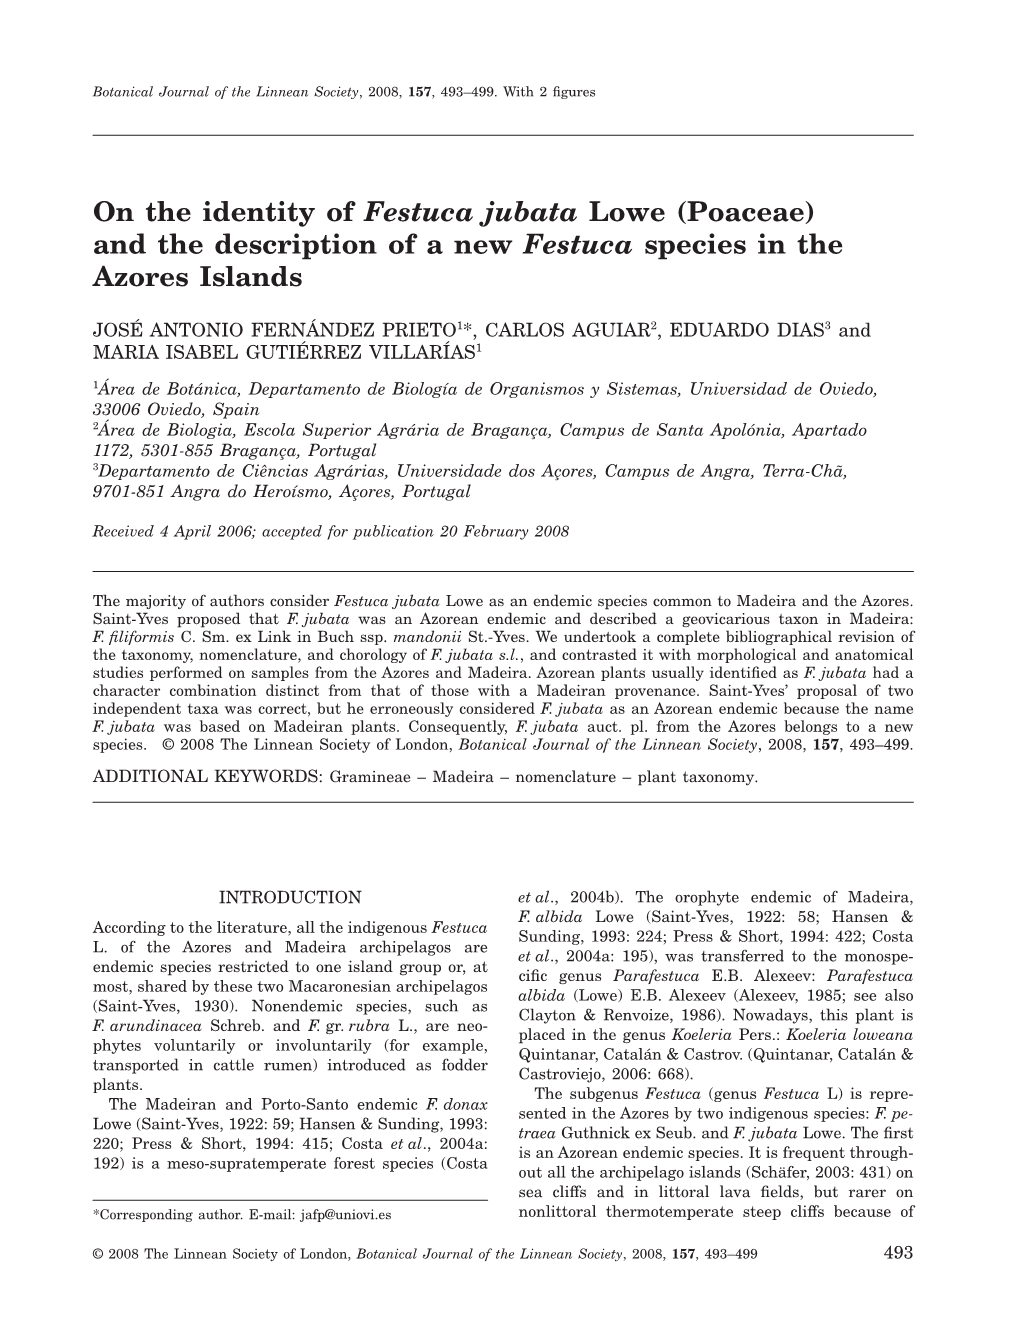 On the Identity of Festuca Jubata Lowe (Poaceae) and the Description of a New Festuca Species in the Azores Islands